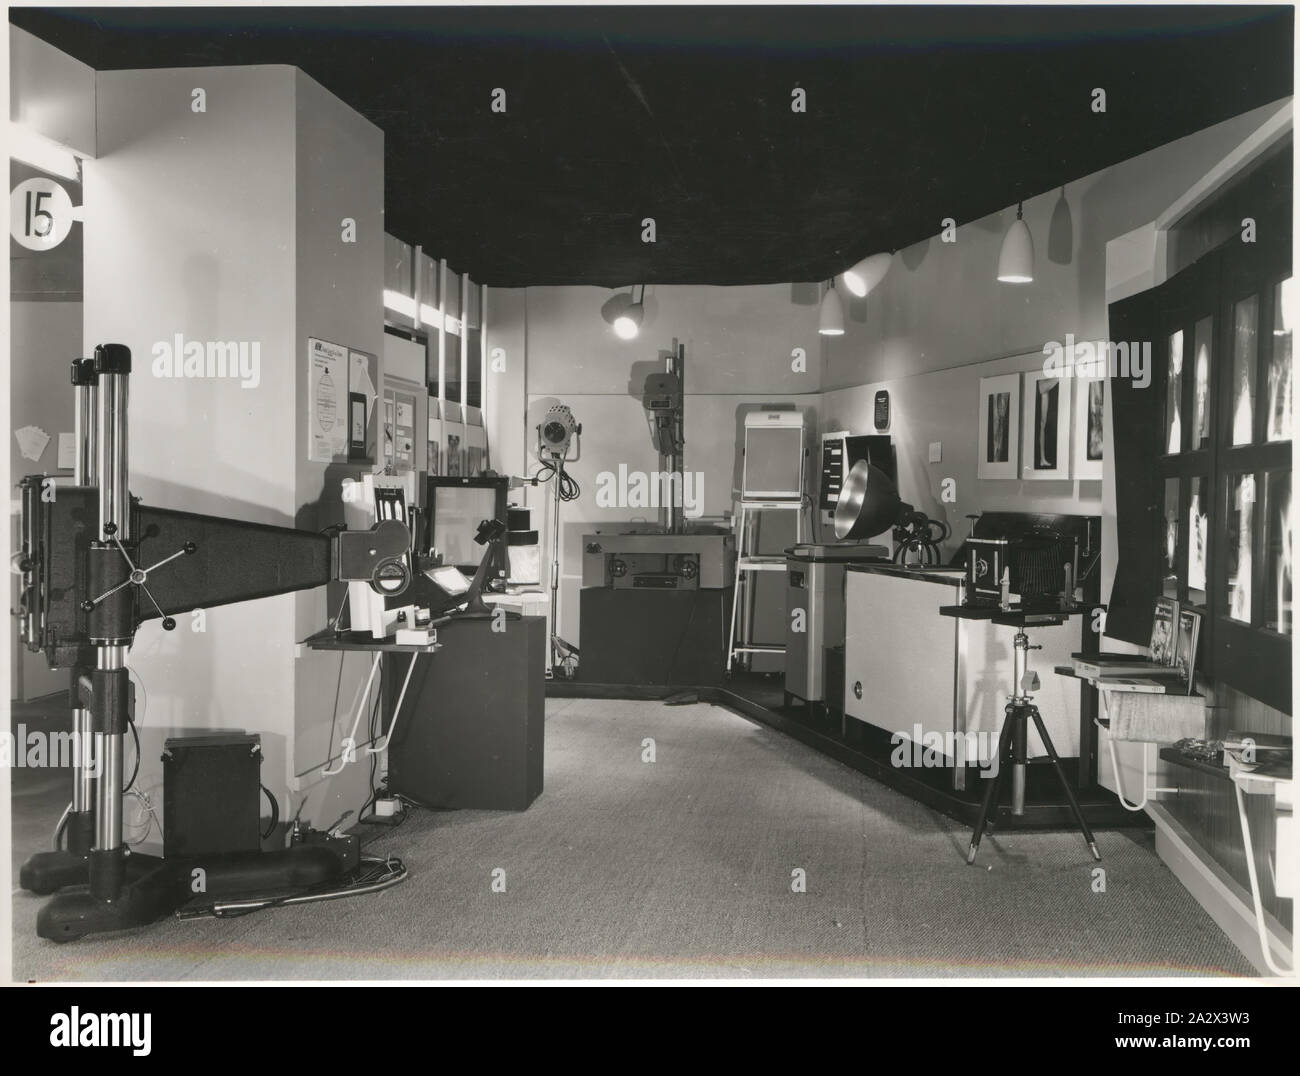 Photograph, Exhibition Stand, Medical Imaging Equipment, circa 1940s, Black and white photograph of a section of a Kodak Australasia Pty Ltd exhibition stand, circa 1940s. This section displays a variety of medical imaging / x-ray equipment including cameras, screens, lighting and film. This photograph is part of the Kodak collection of products, promotional materials, photographs and working life artefacts, when Stock Photo